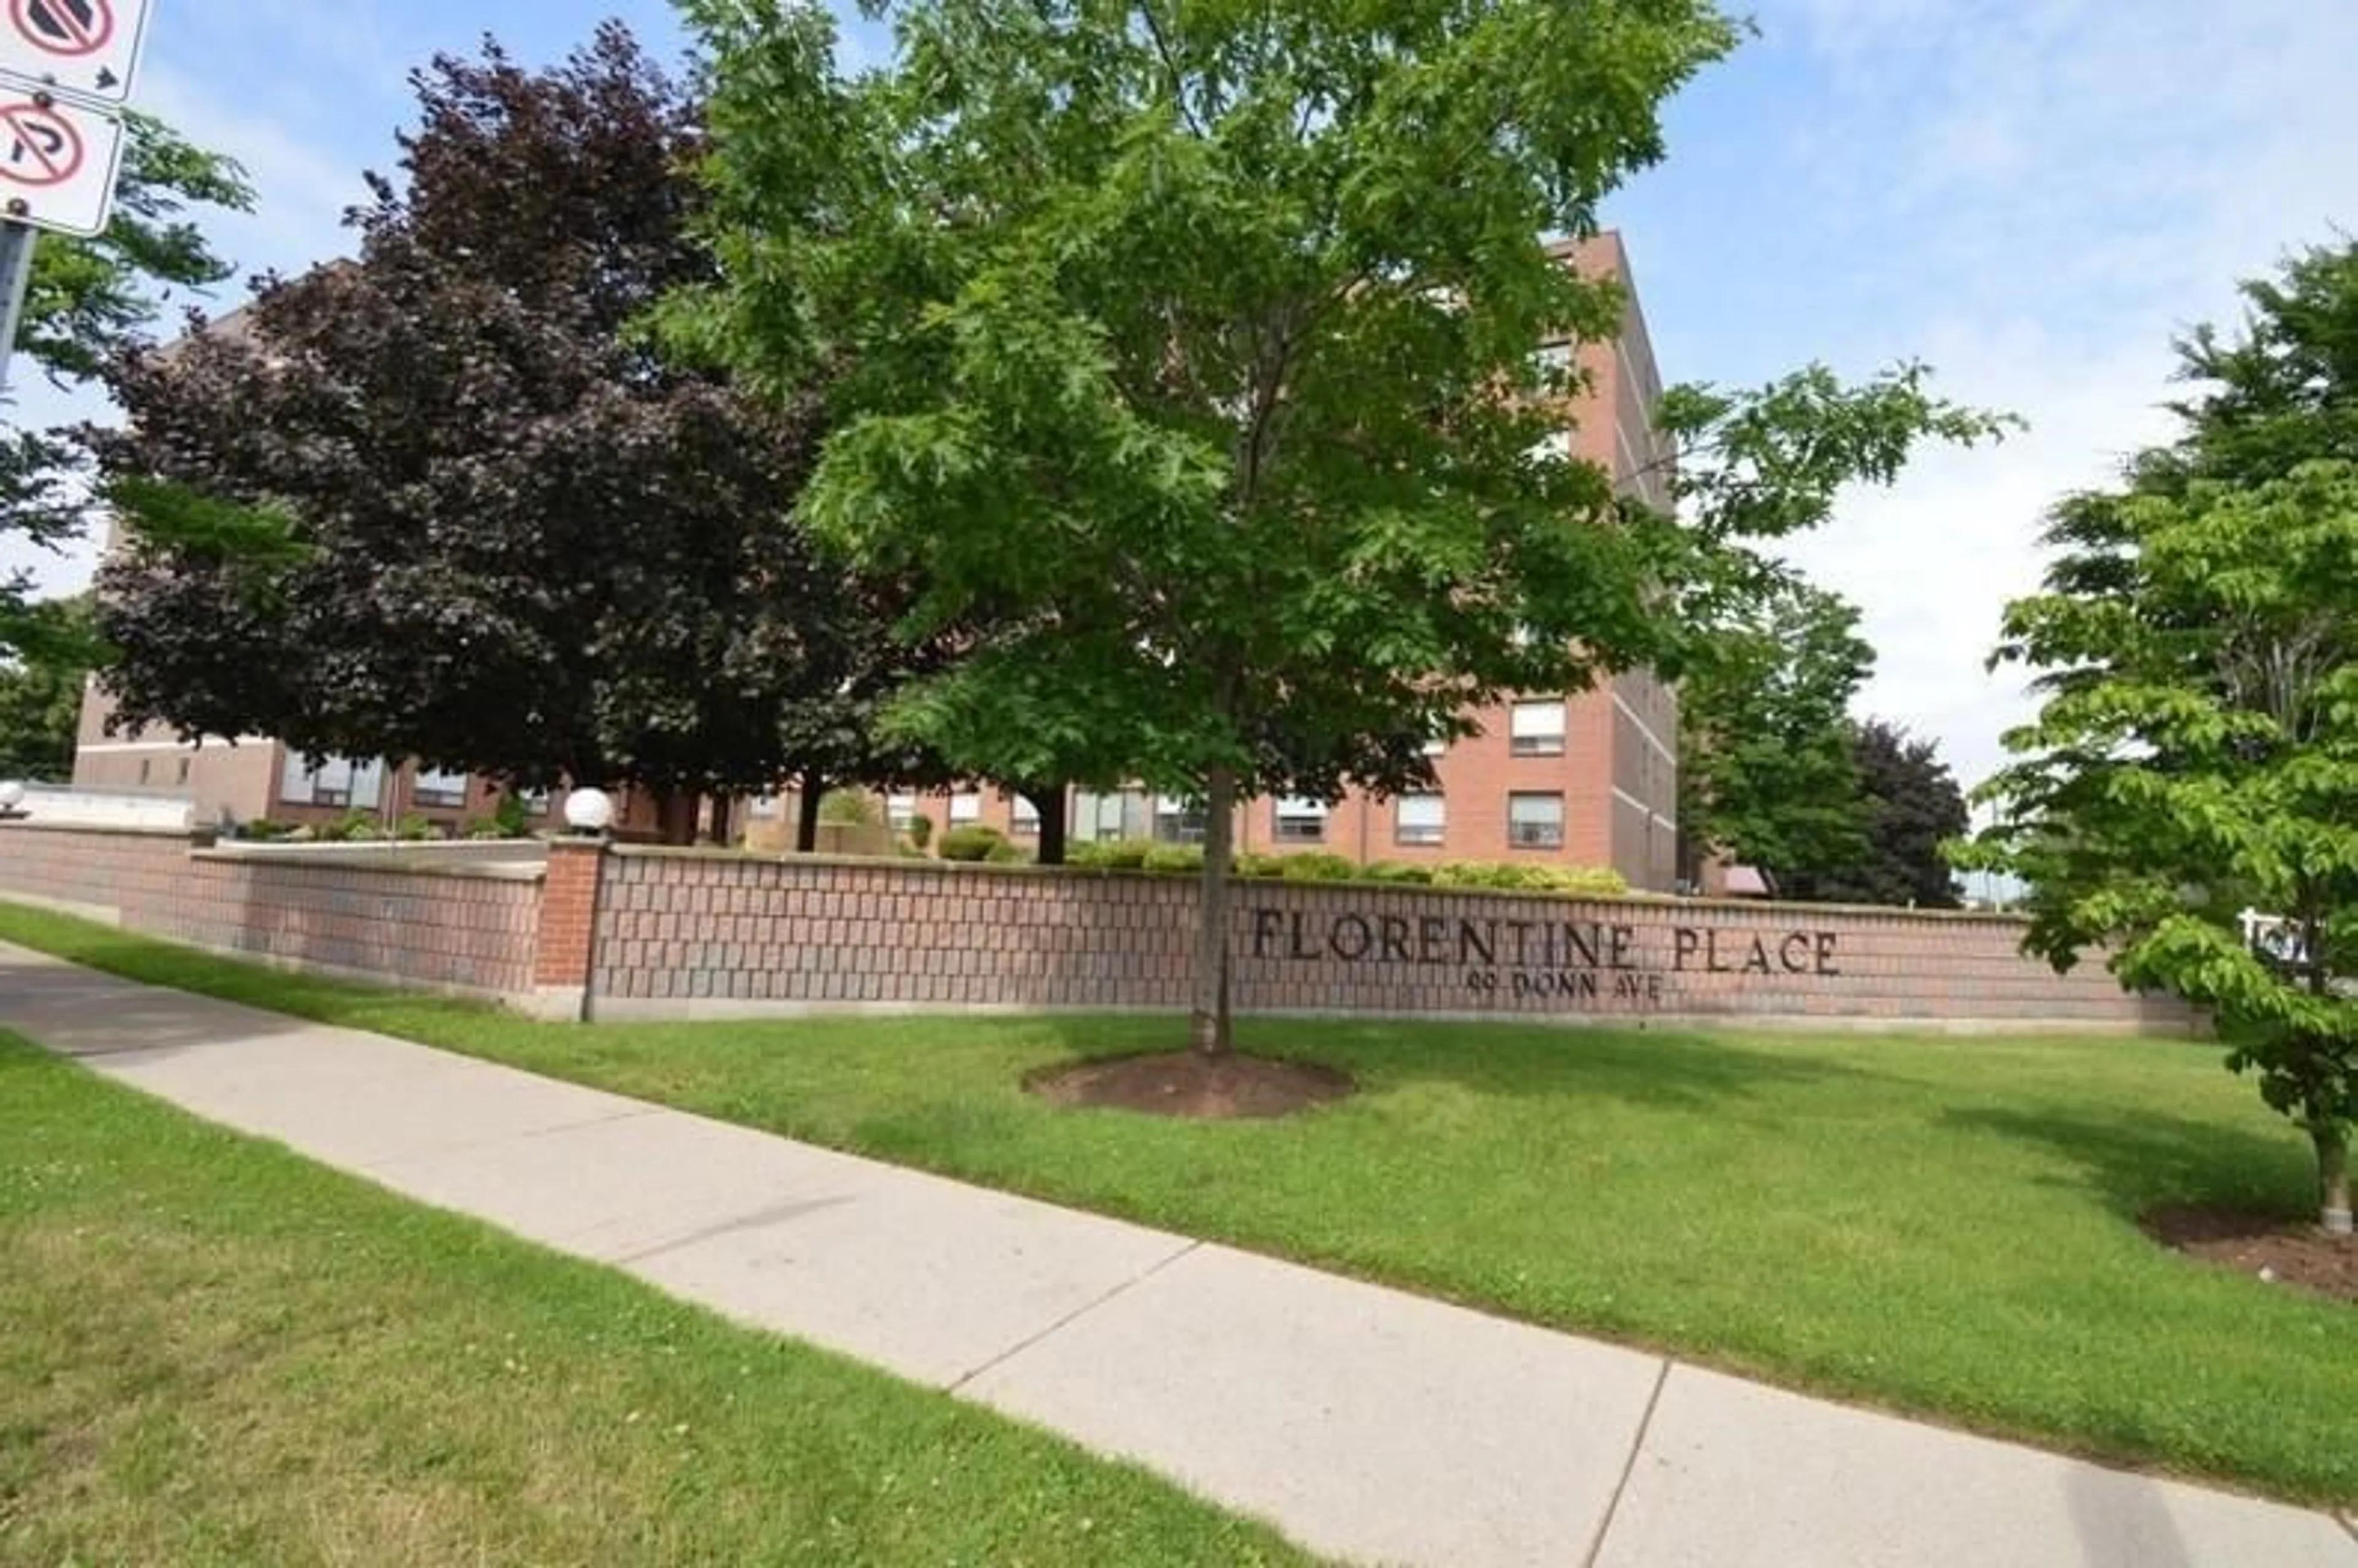 Lakeview for 99 Donn Ave #704, Stoney Creek Ontario L8G 5B2